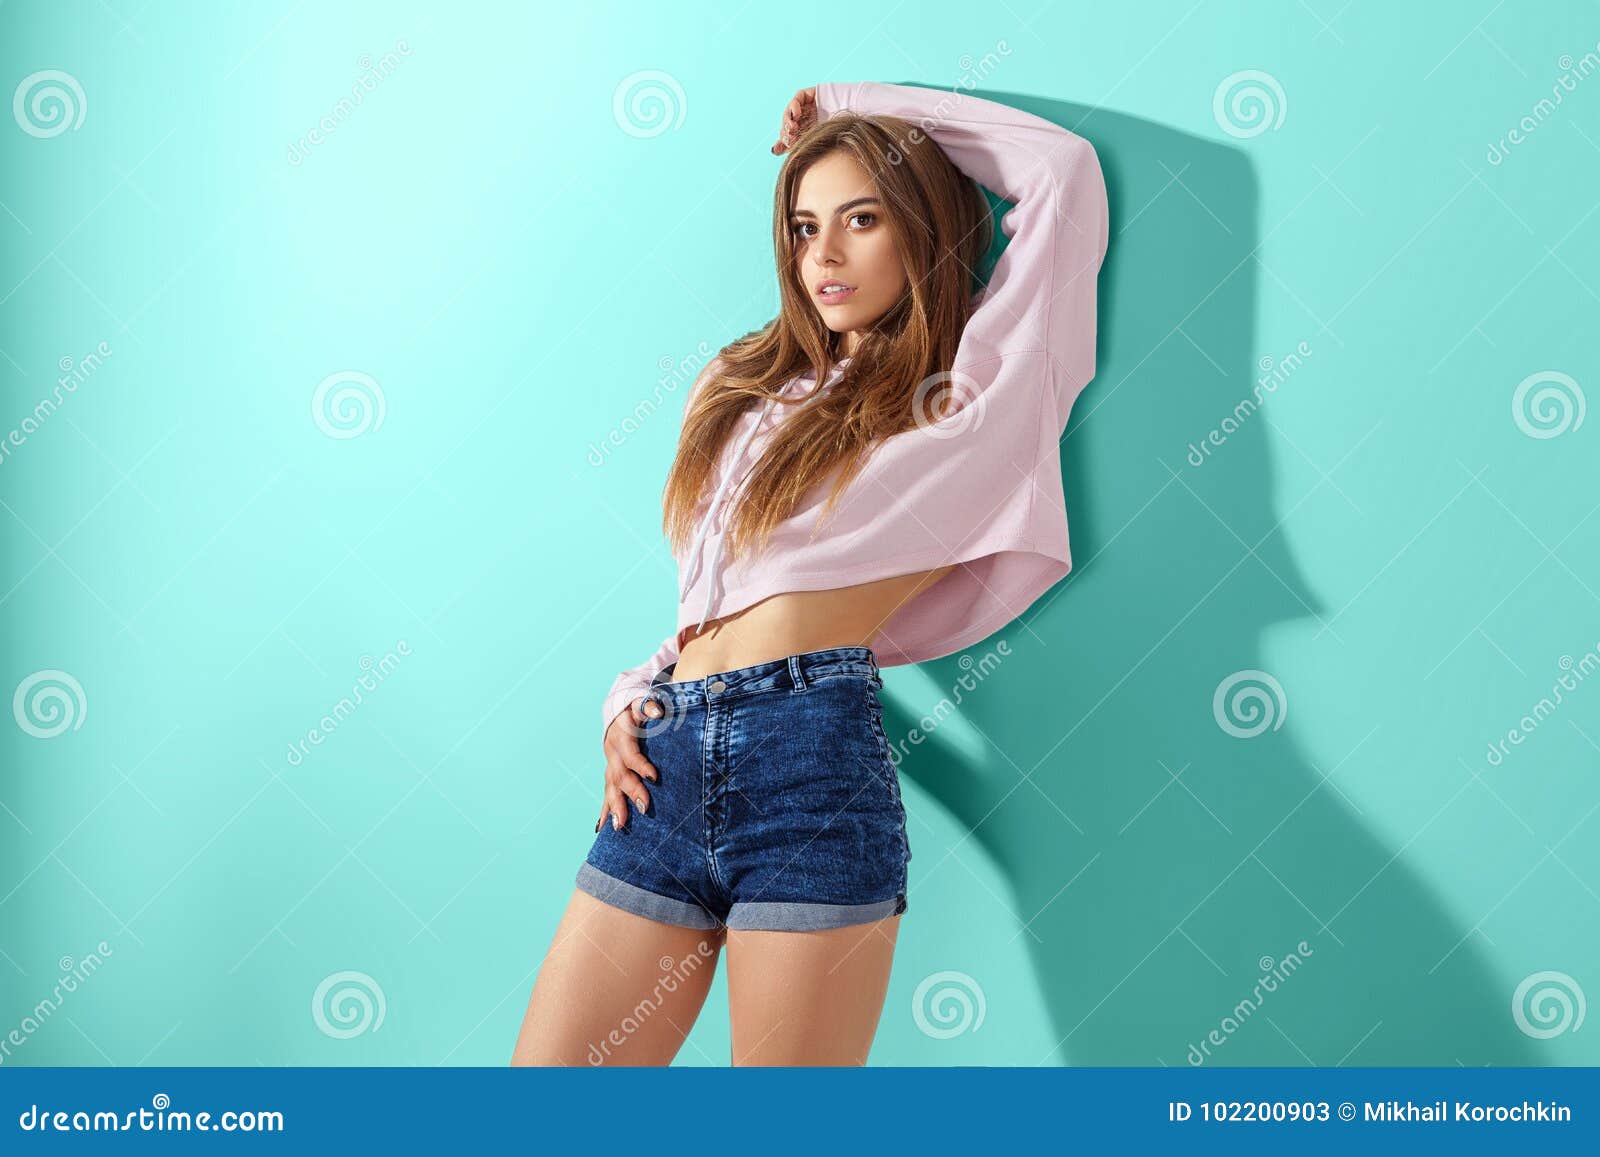 Young Girl on Blue Background Stock Image - Image of jeans, attractive ...